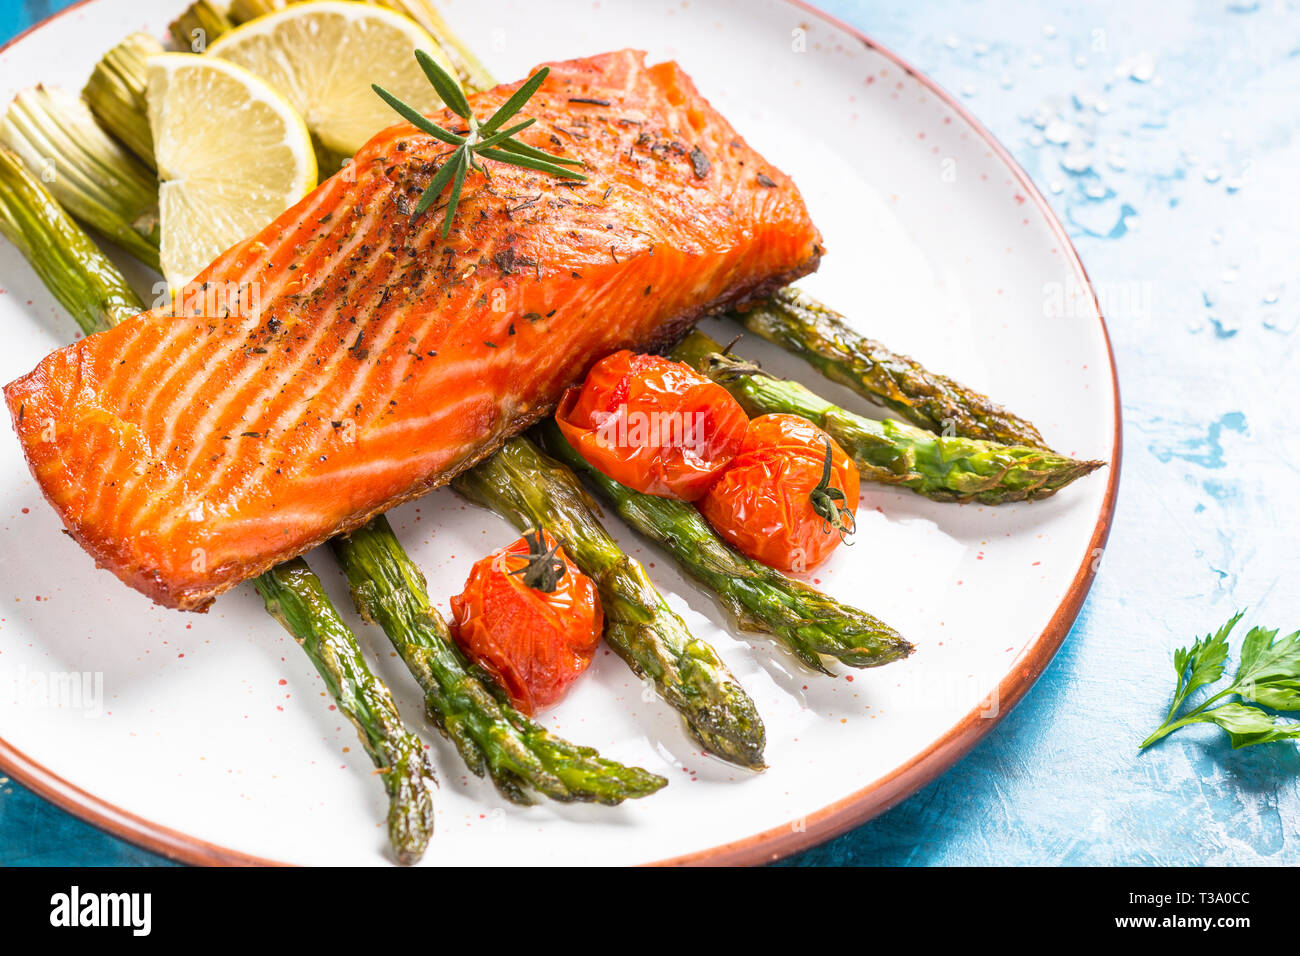 Grilled salmon fish fillet with asparagus Stock Photo - Alamy